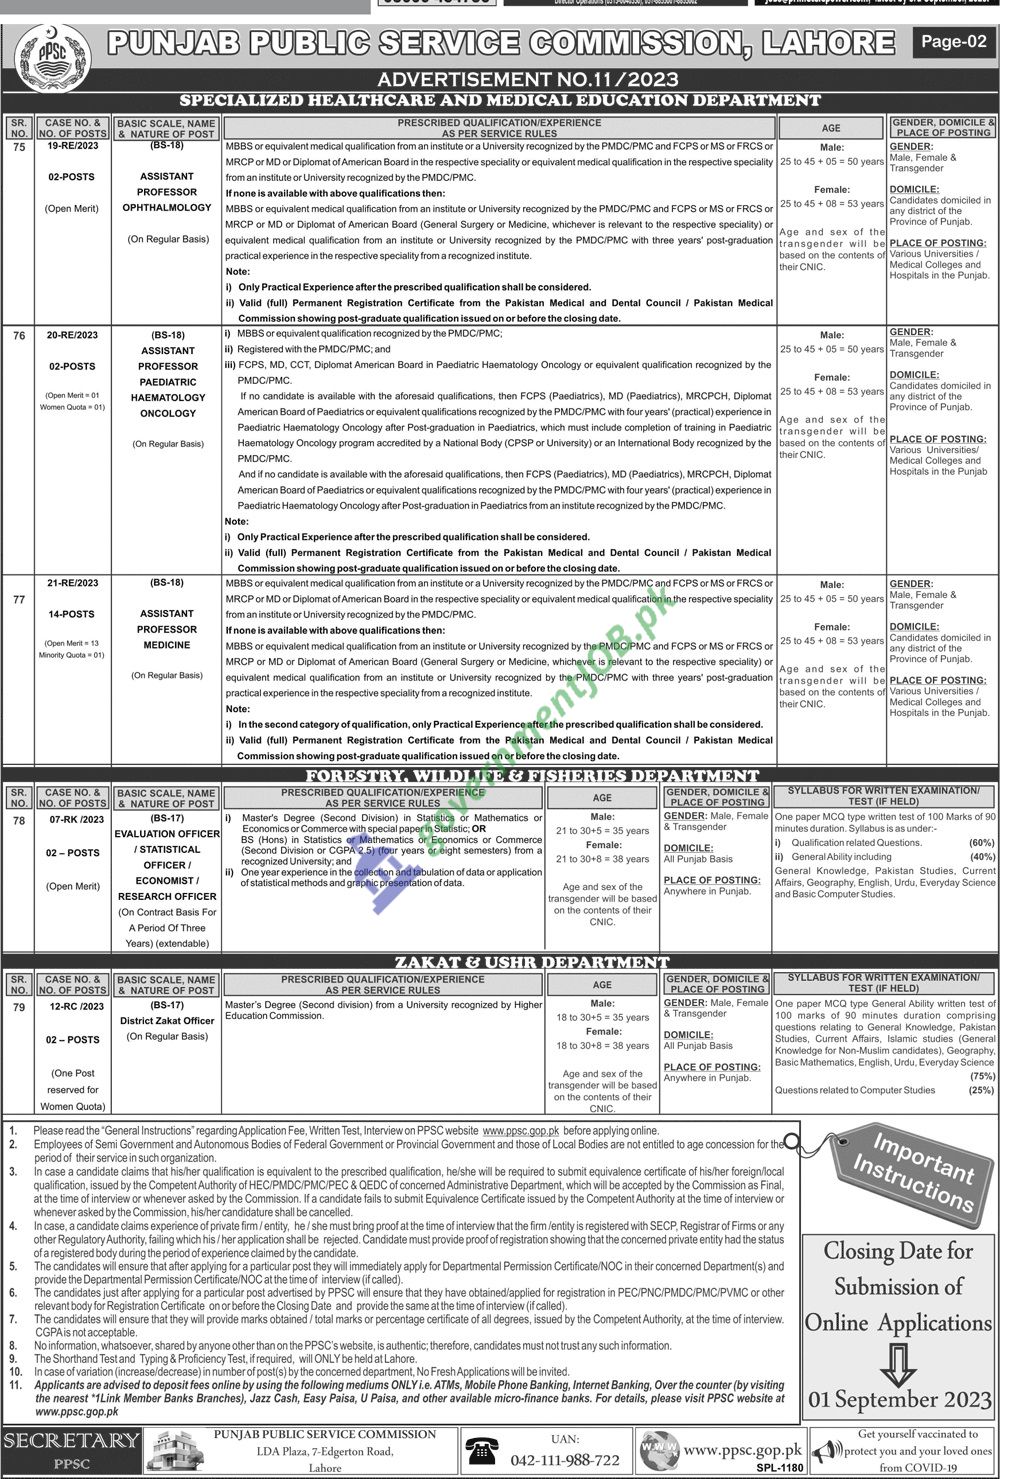 PPSC jobs AD no. 11 Page 2